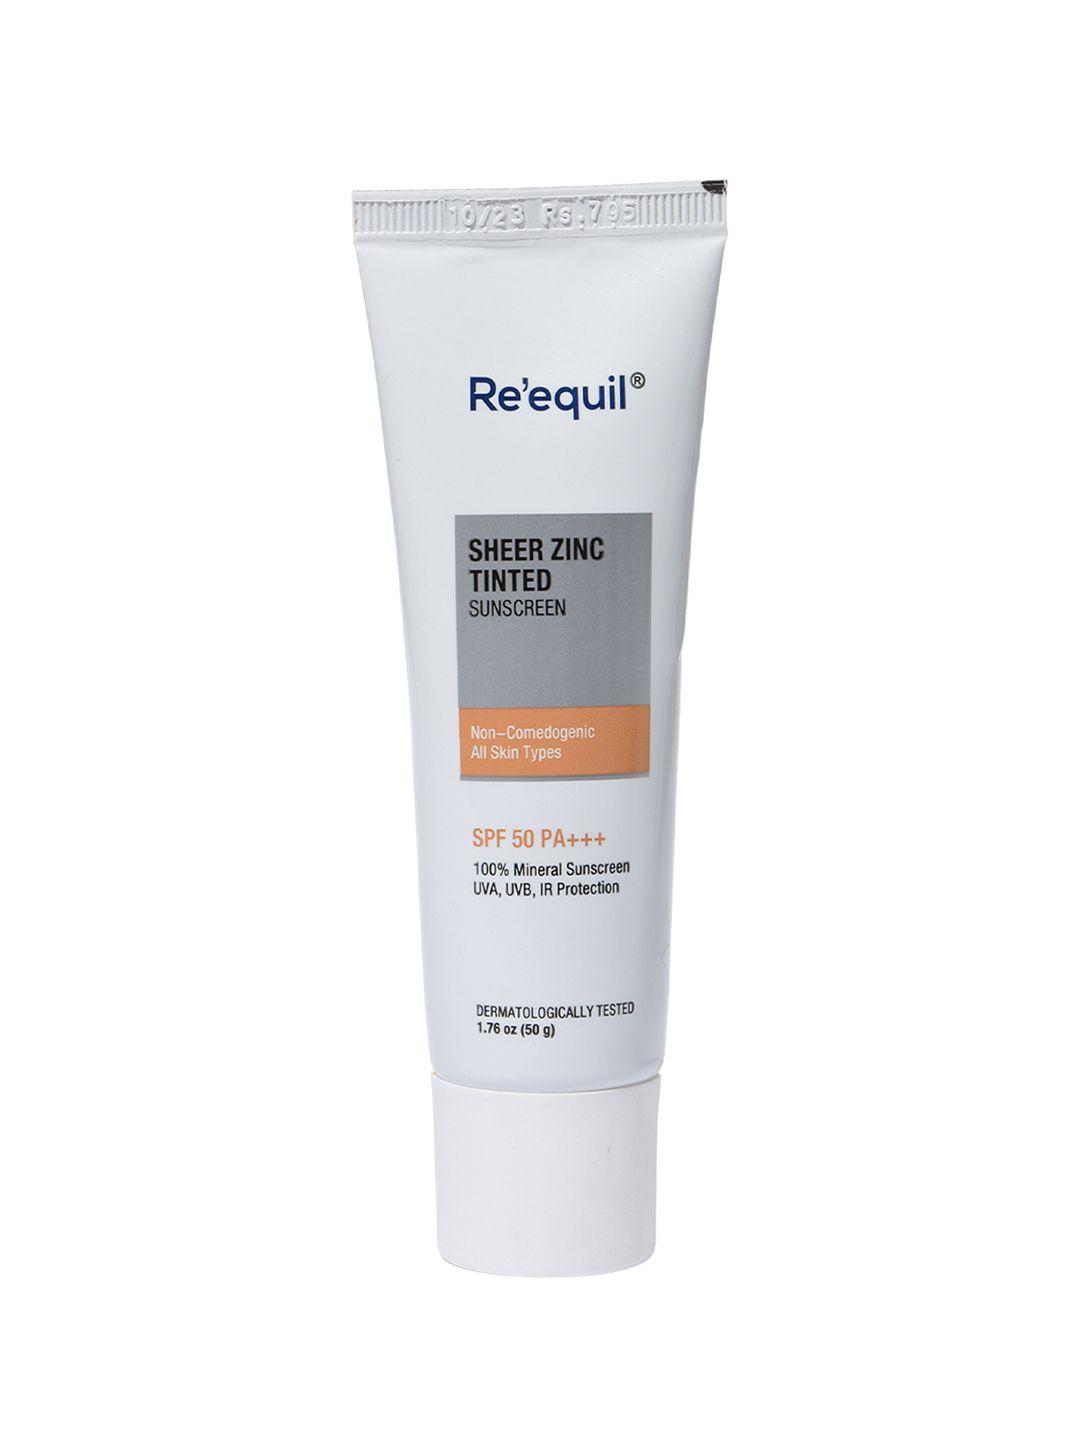 reequil-unisex-sheer-zinc-tinted-spf-50-pa+++-mineral-sunscreen-with-zinc-oxide-50g